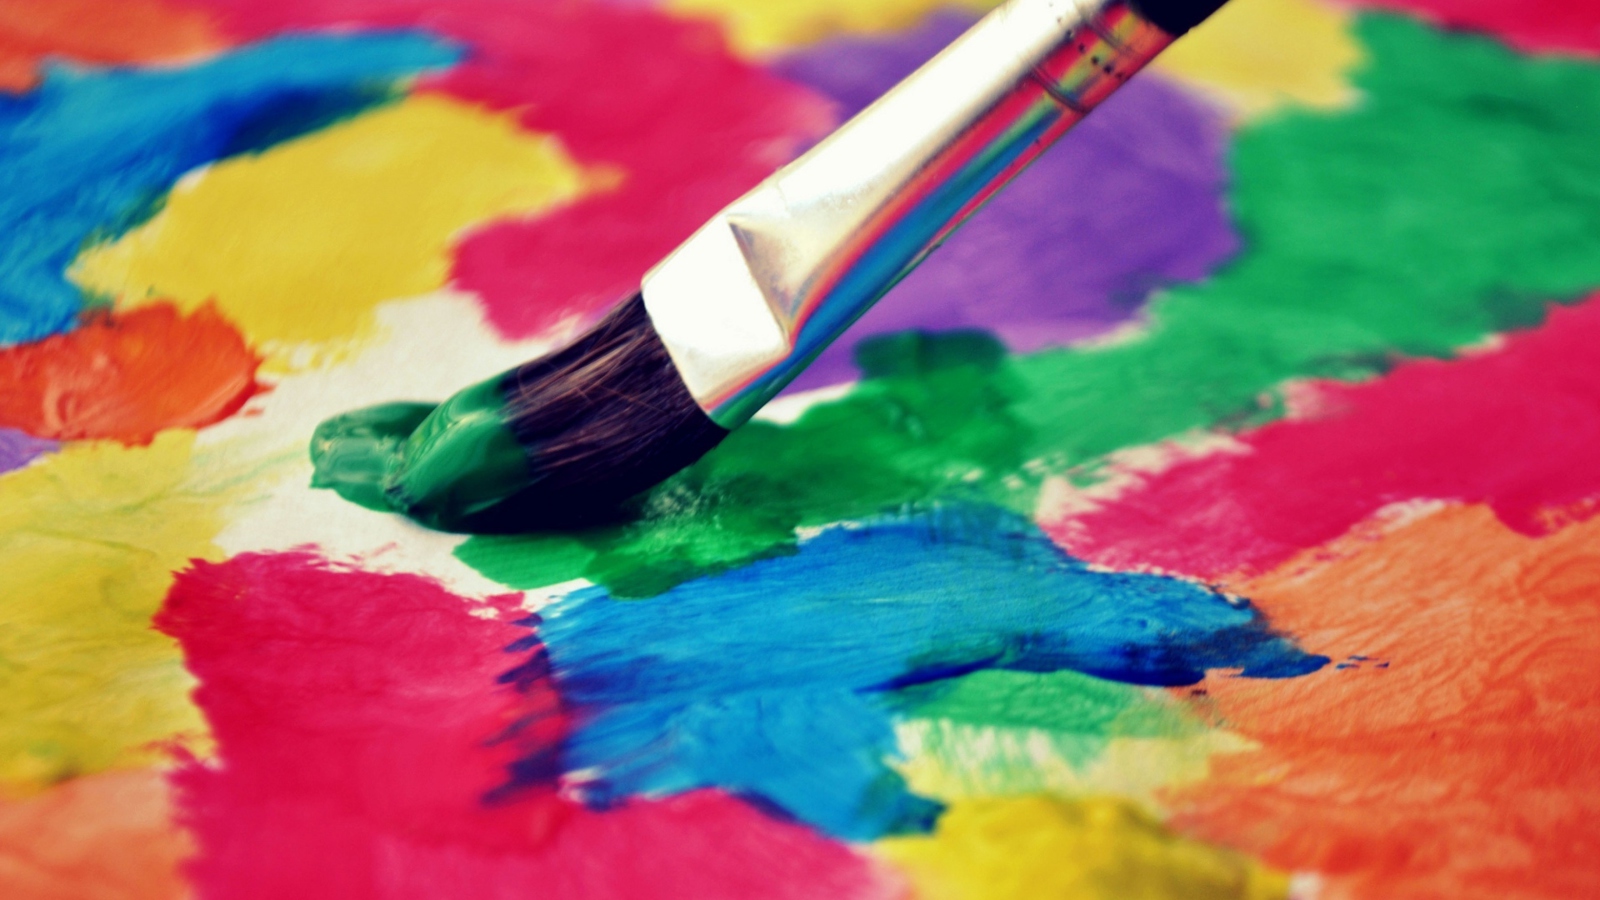 Das Art Brush And Colorful Paint Wallpaper 1600x900